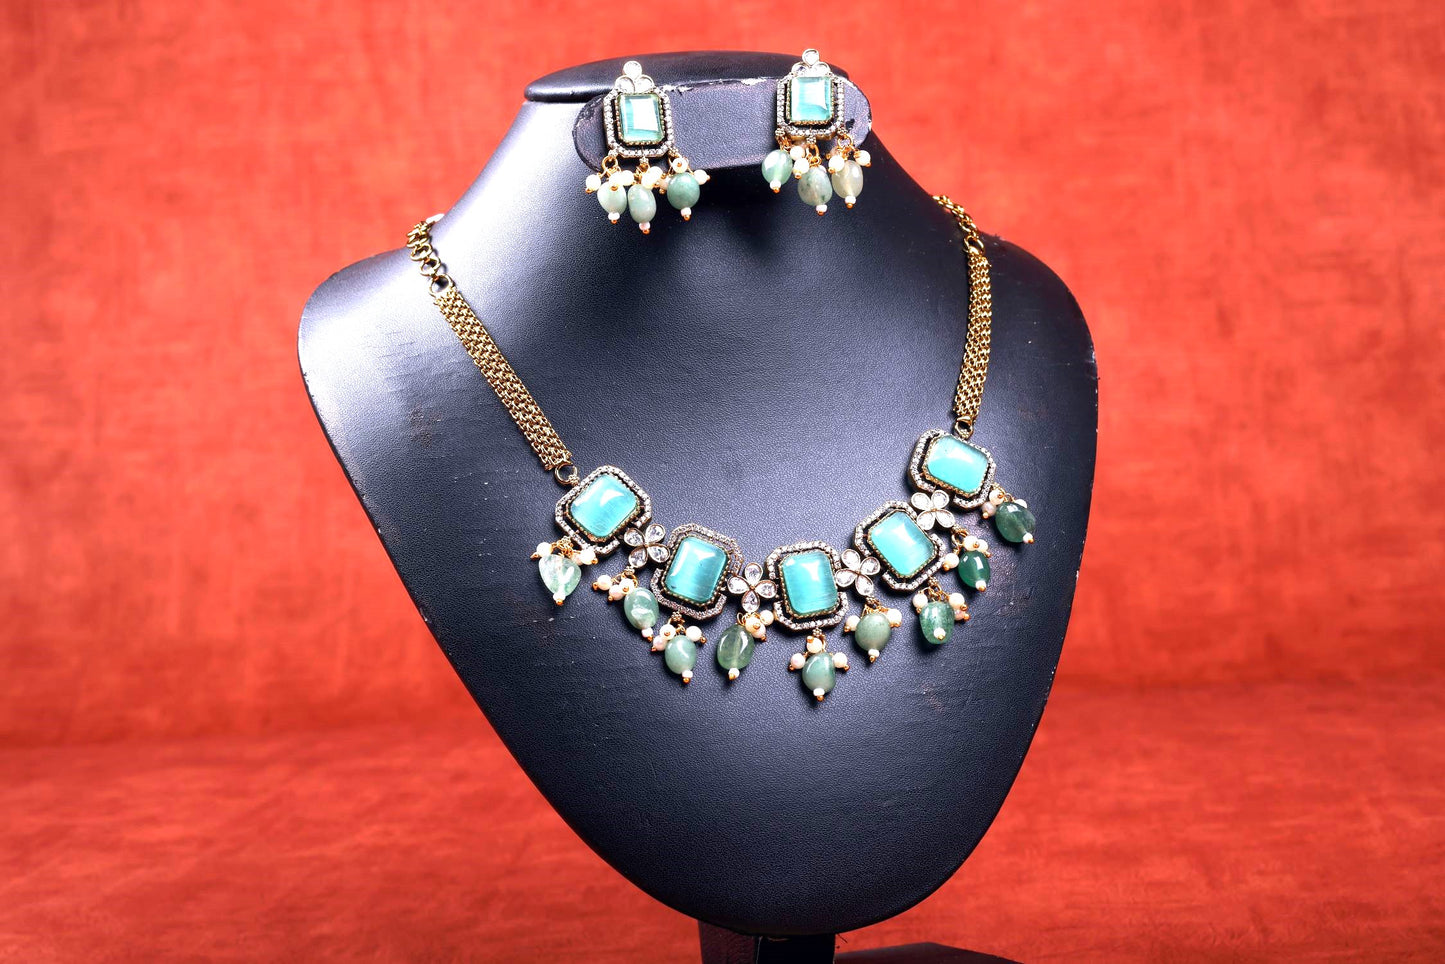 Artificial Jewelry - Necklace Set - Green